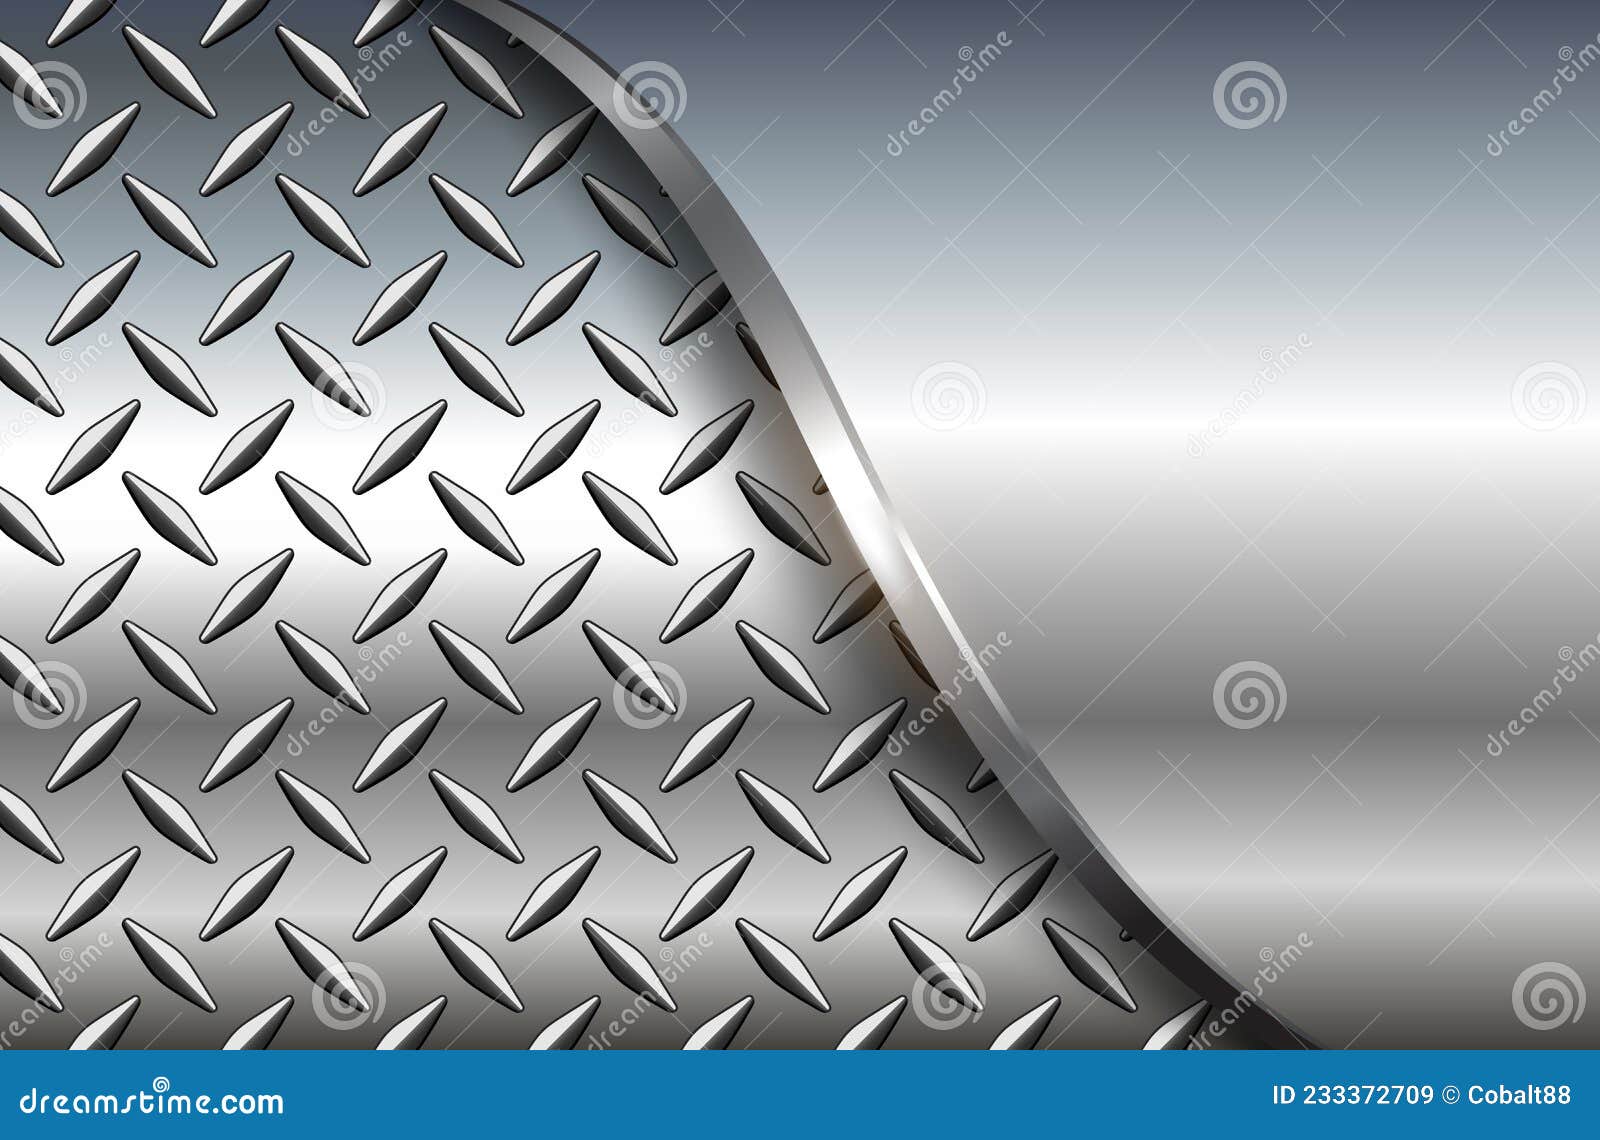 Silver Polished Steel Texture Background, Chrome Metallic with Diamond  Plate Texture Stock Vector - Illustration of glossy, grid: 233372709